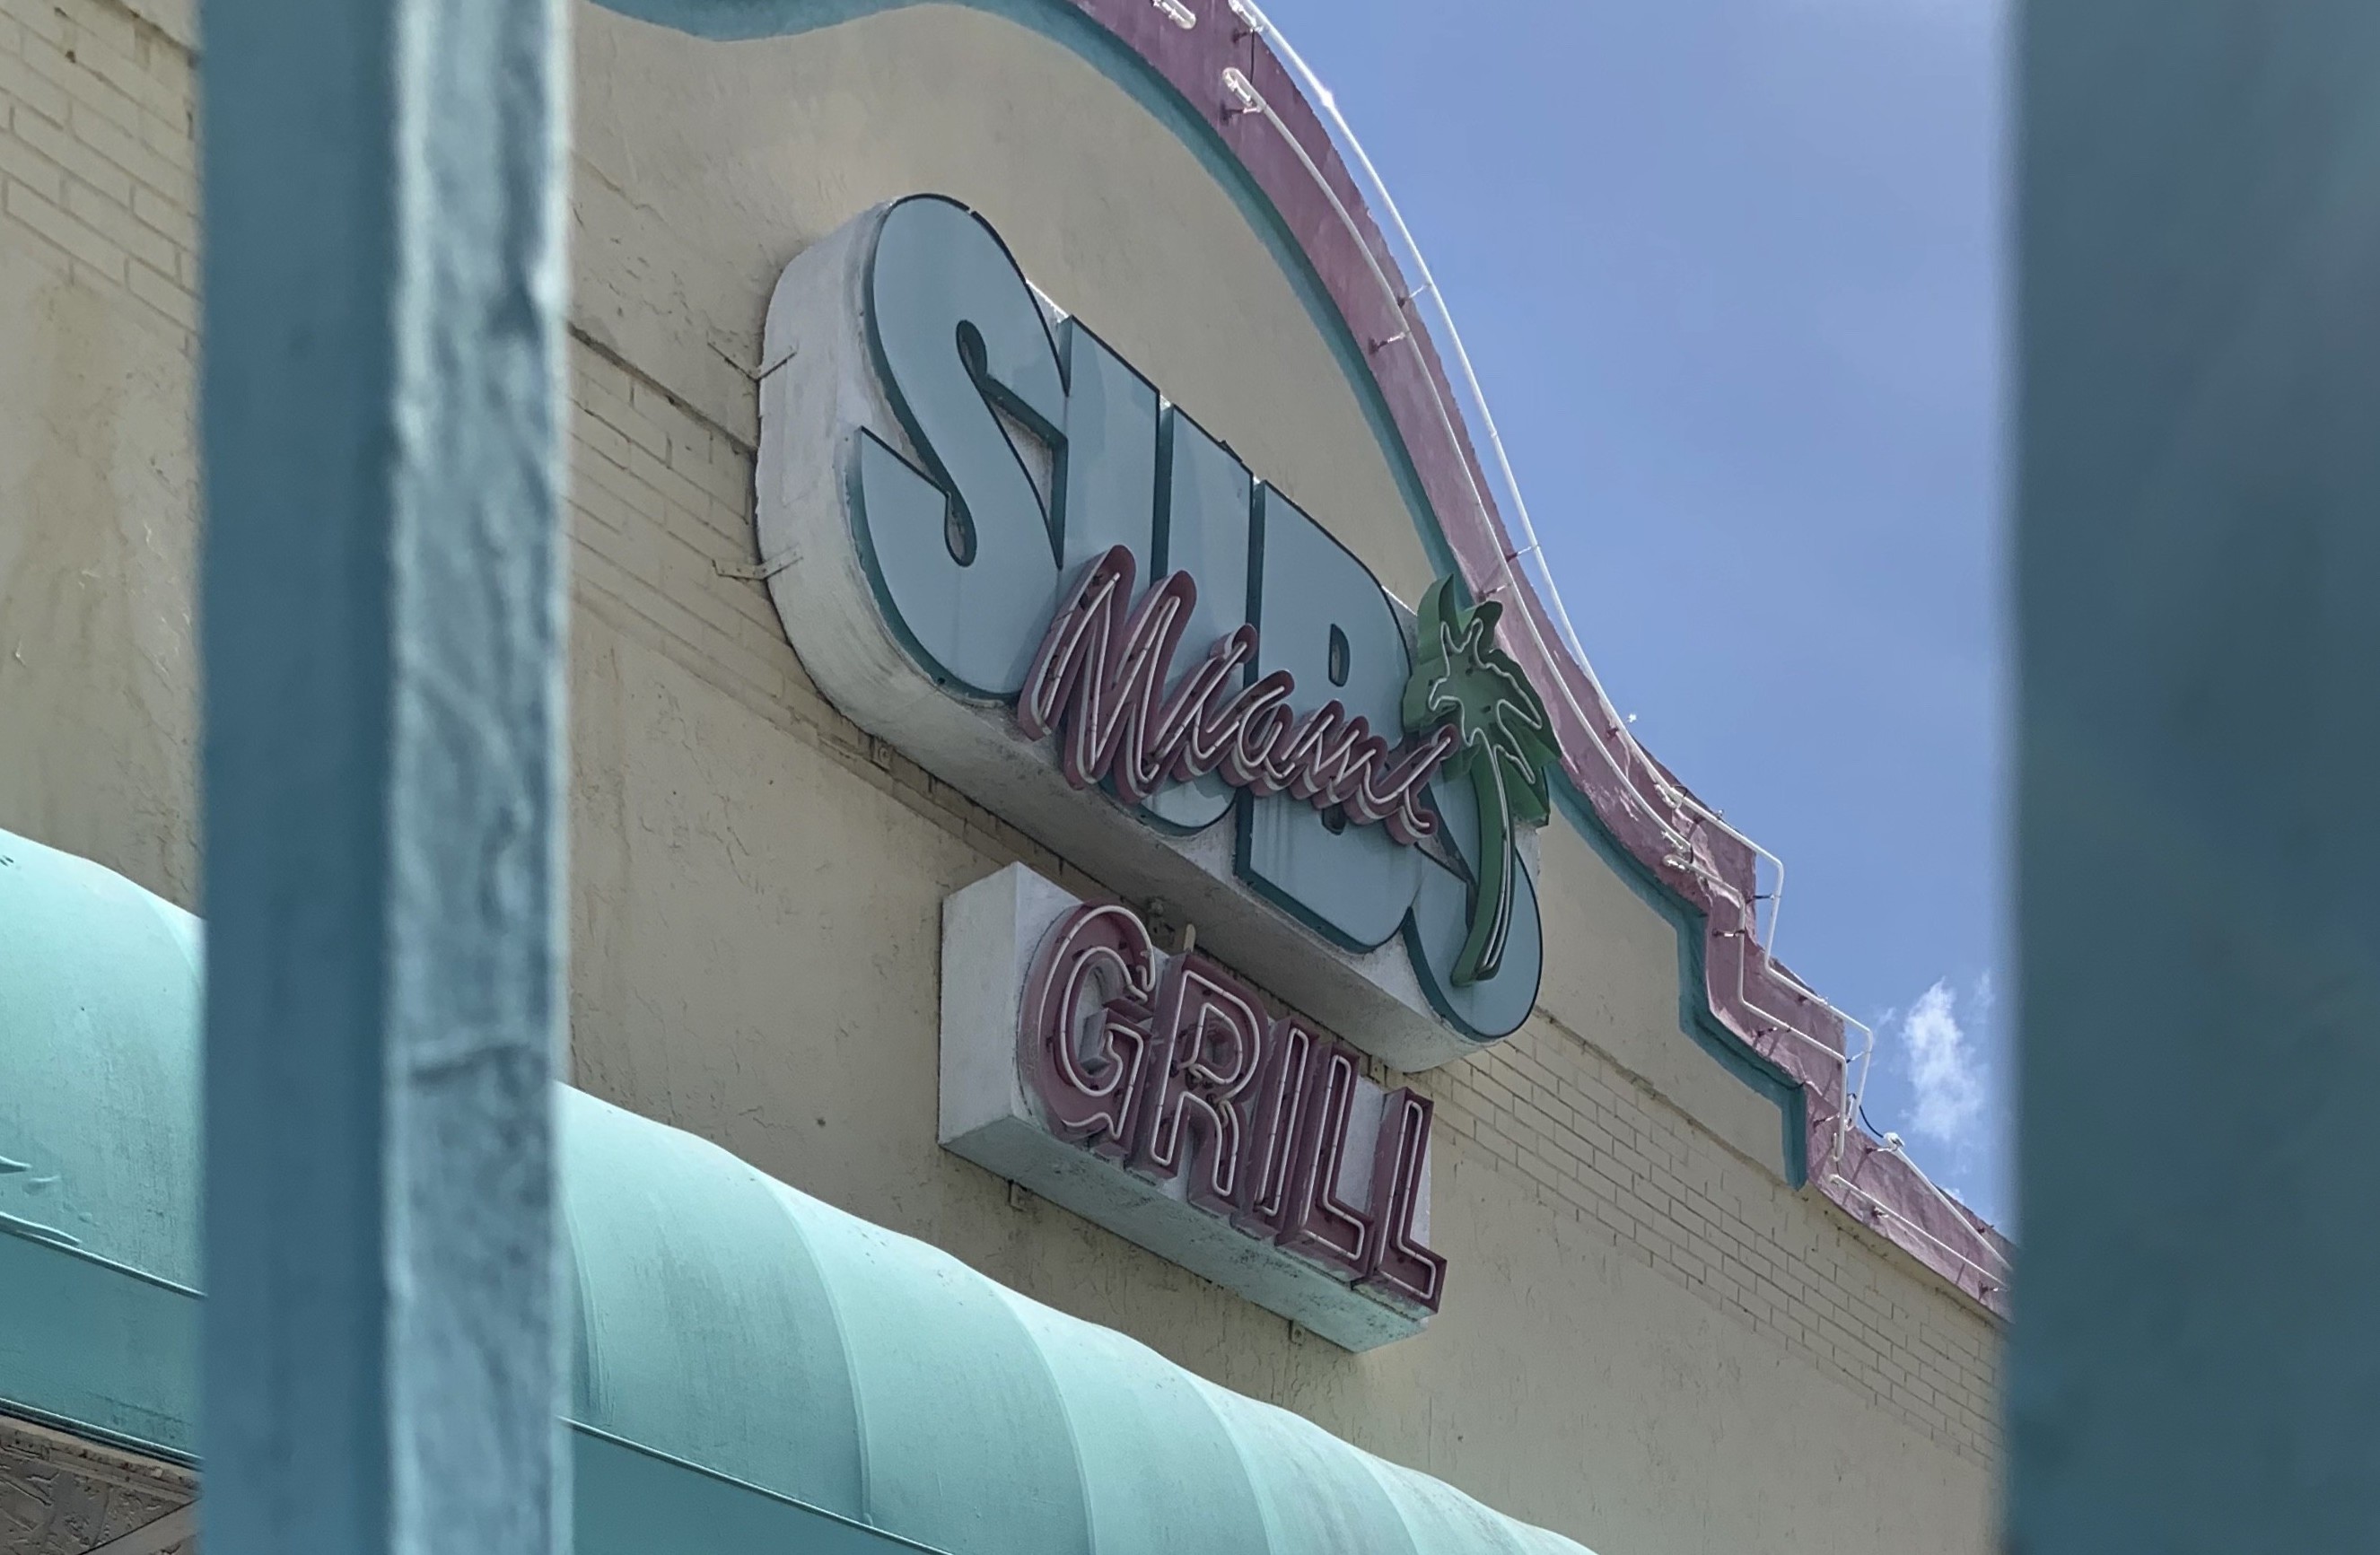 Hd X School Grill Vedio In Com - Miami Subs Porn Shot in Hialeah: The True Story Behind the Urban Legend |  Miami New Times